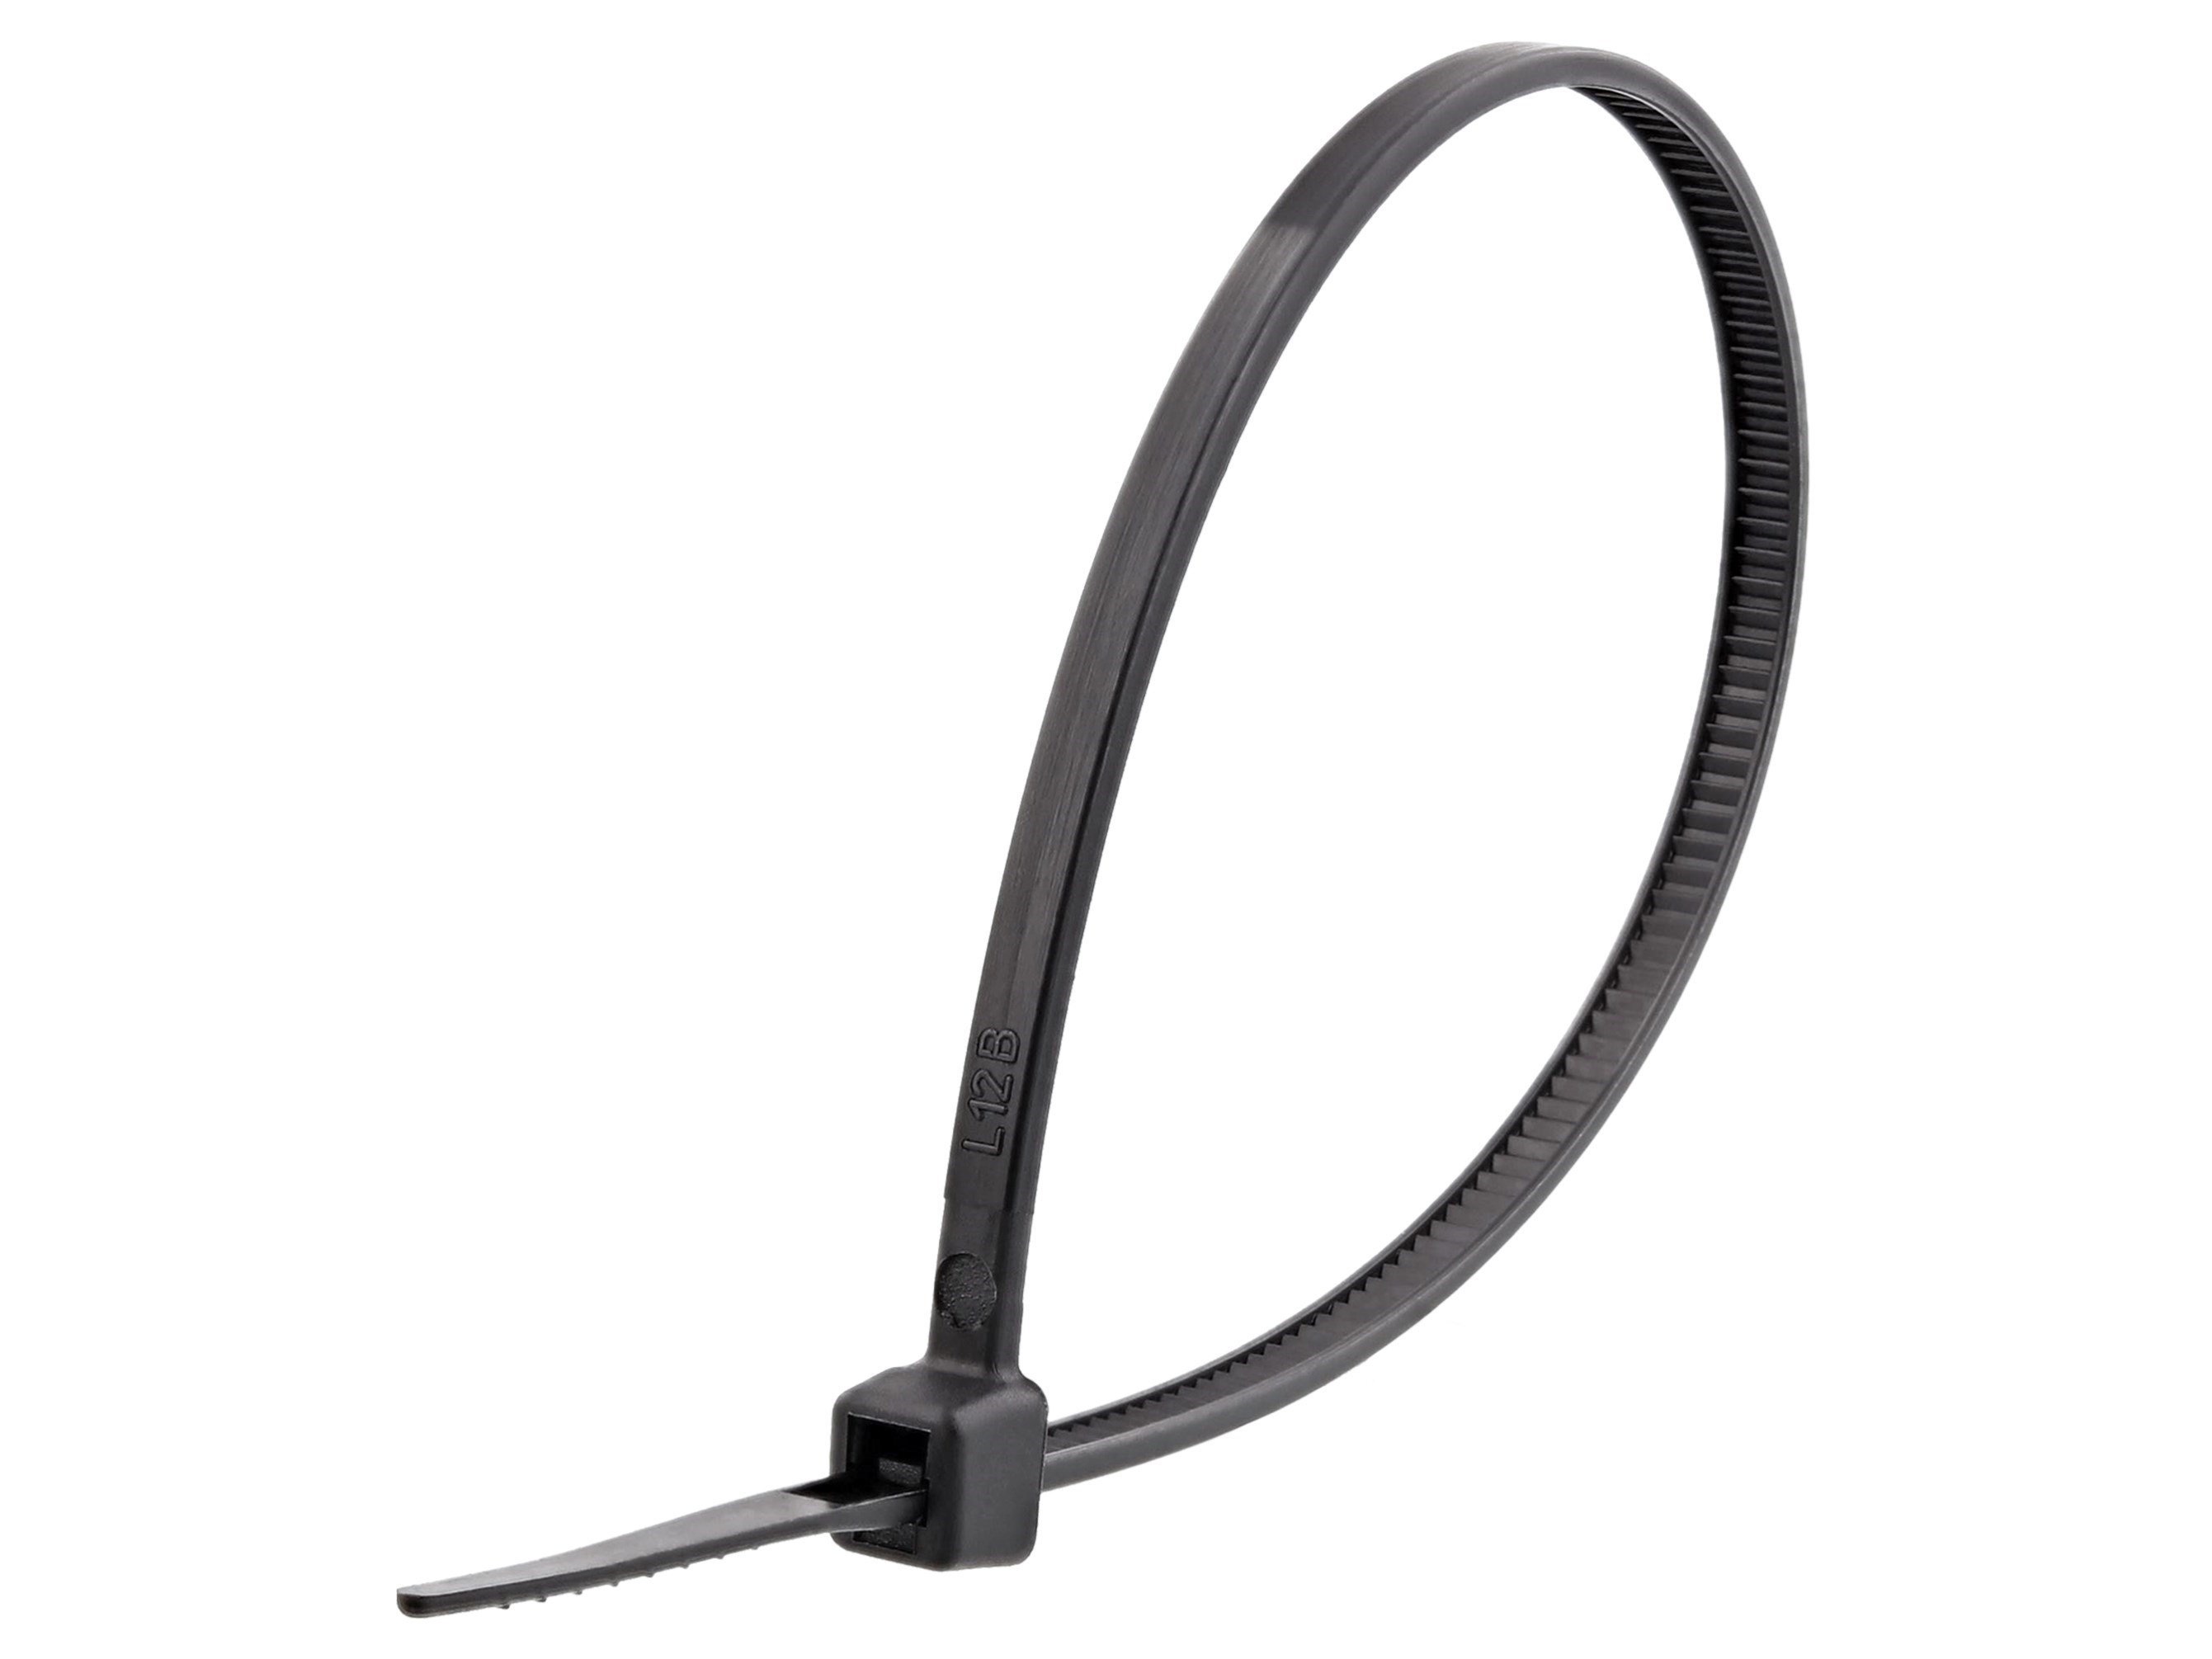 6 Inch Black Miniature Nylon Cable Tie - 100 Pack